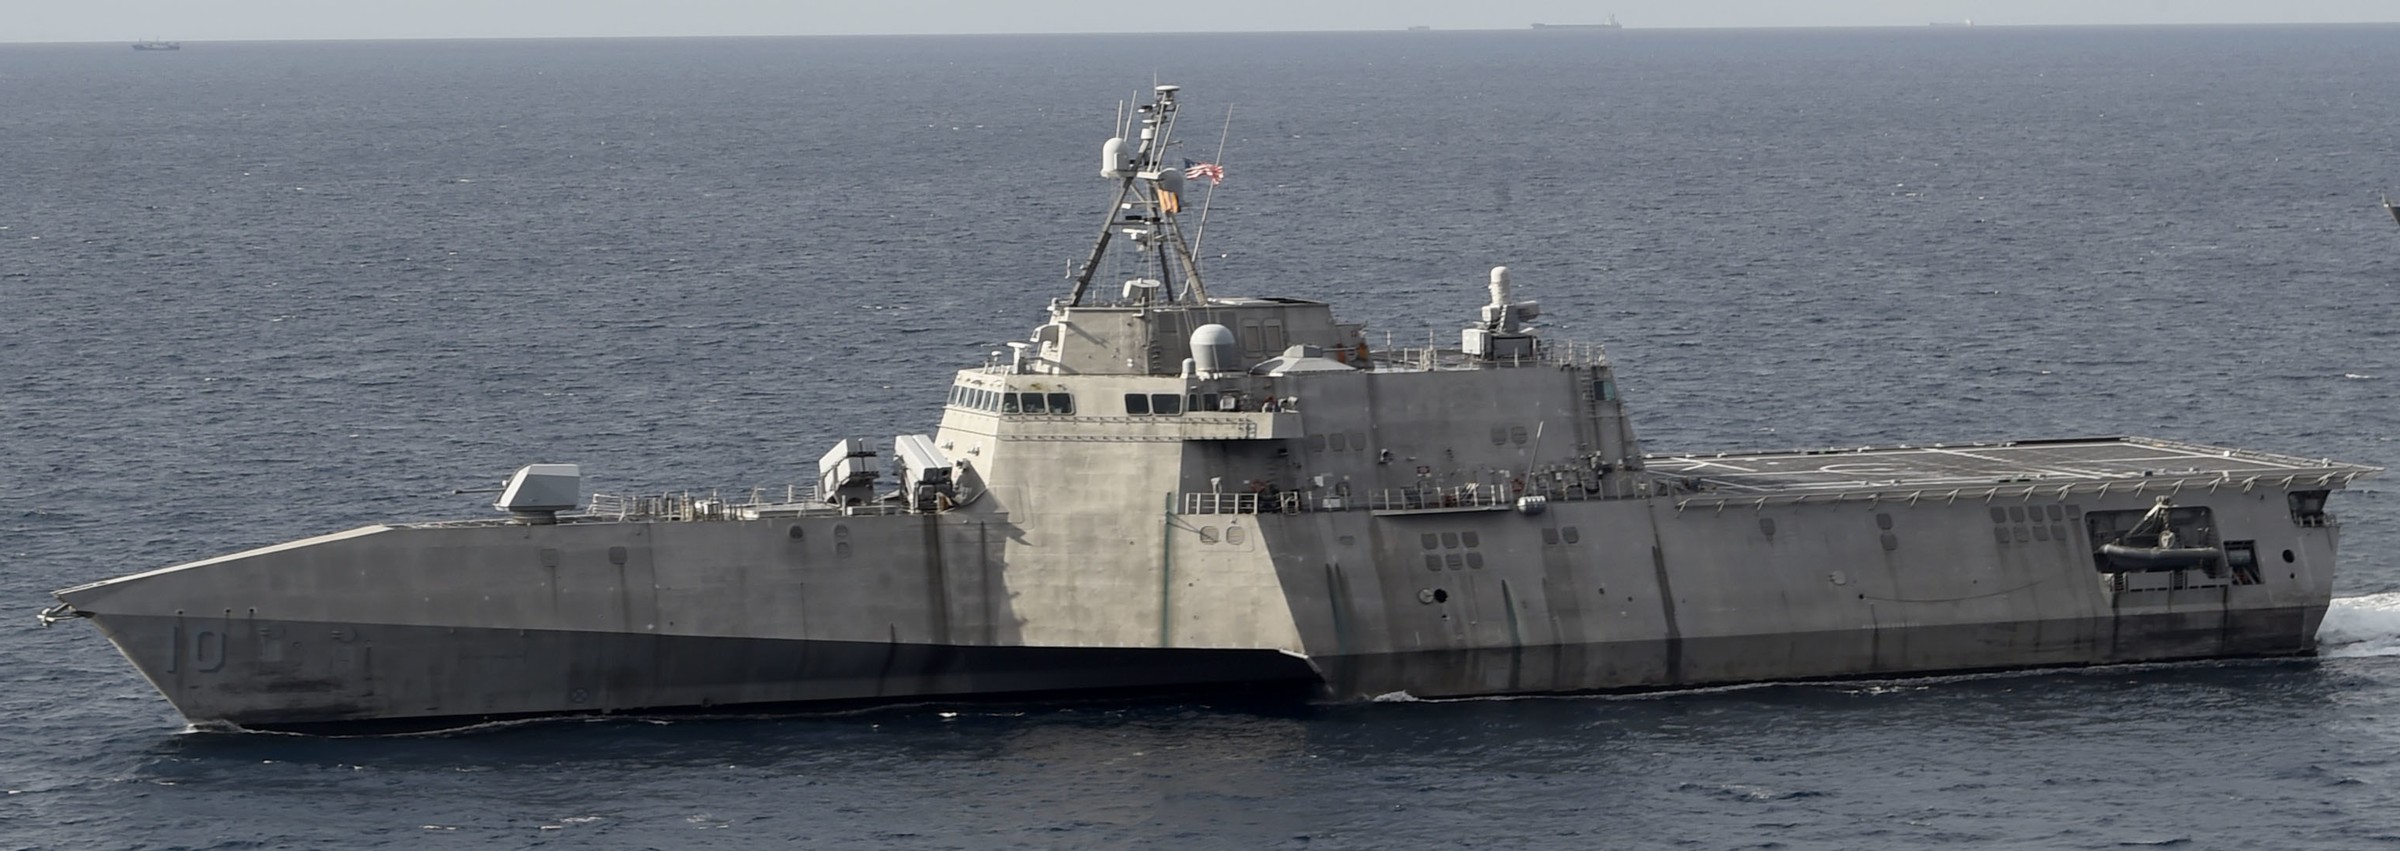 lcs-10 uss gabrielle giffords littoral combat ship independence class us navy 69